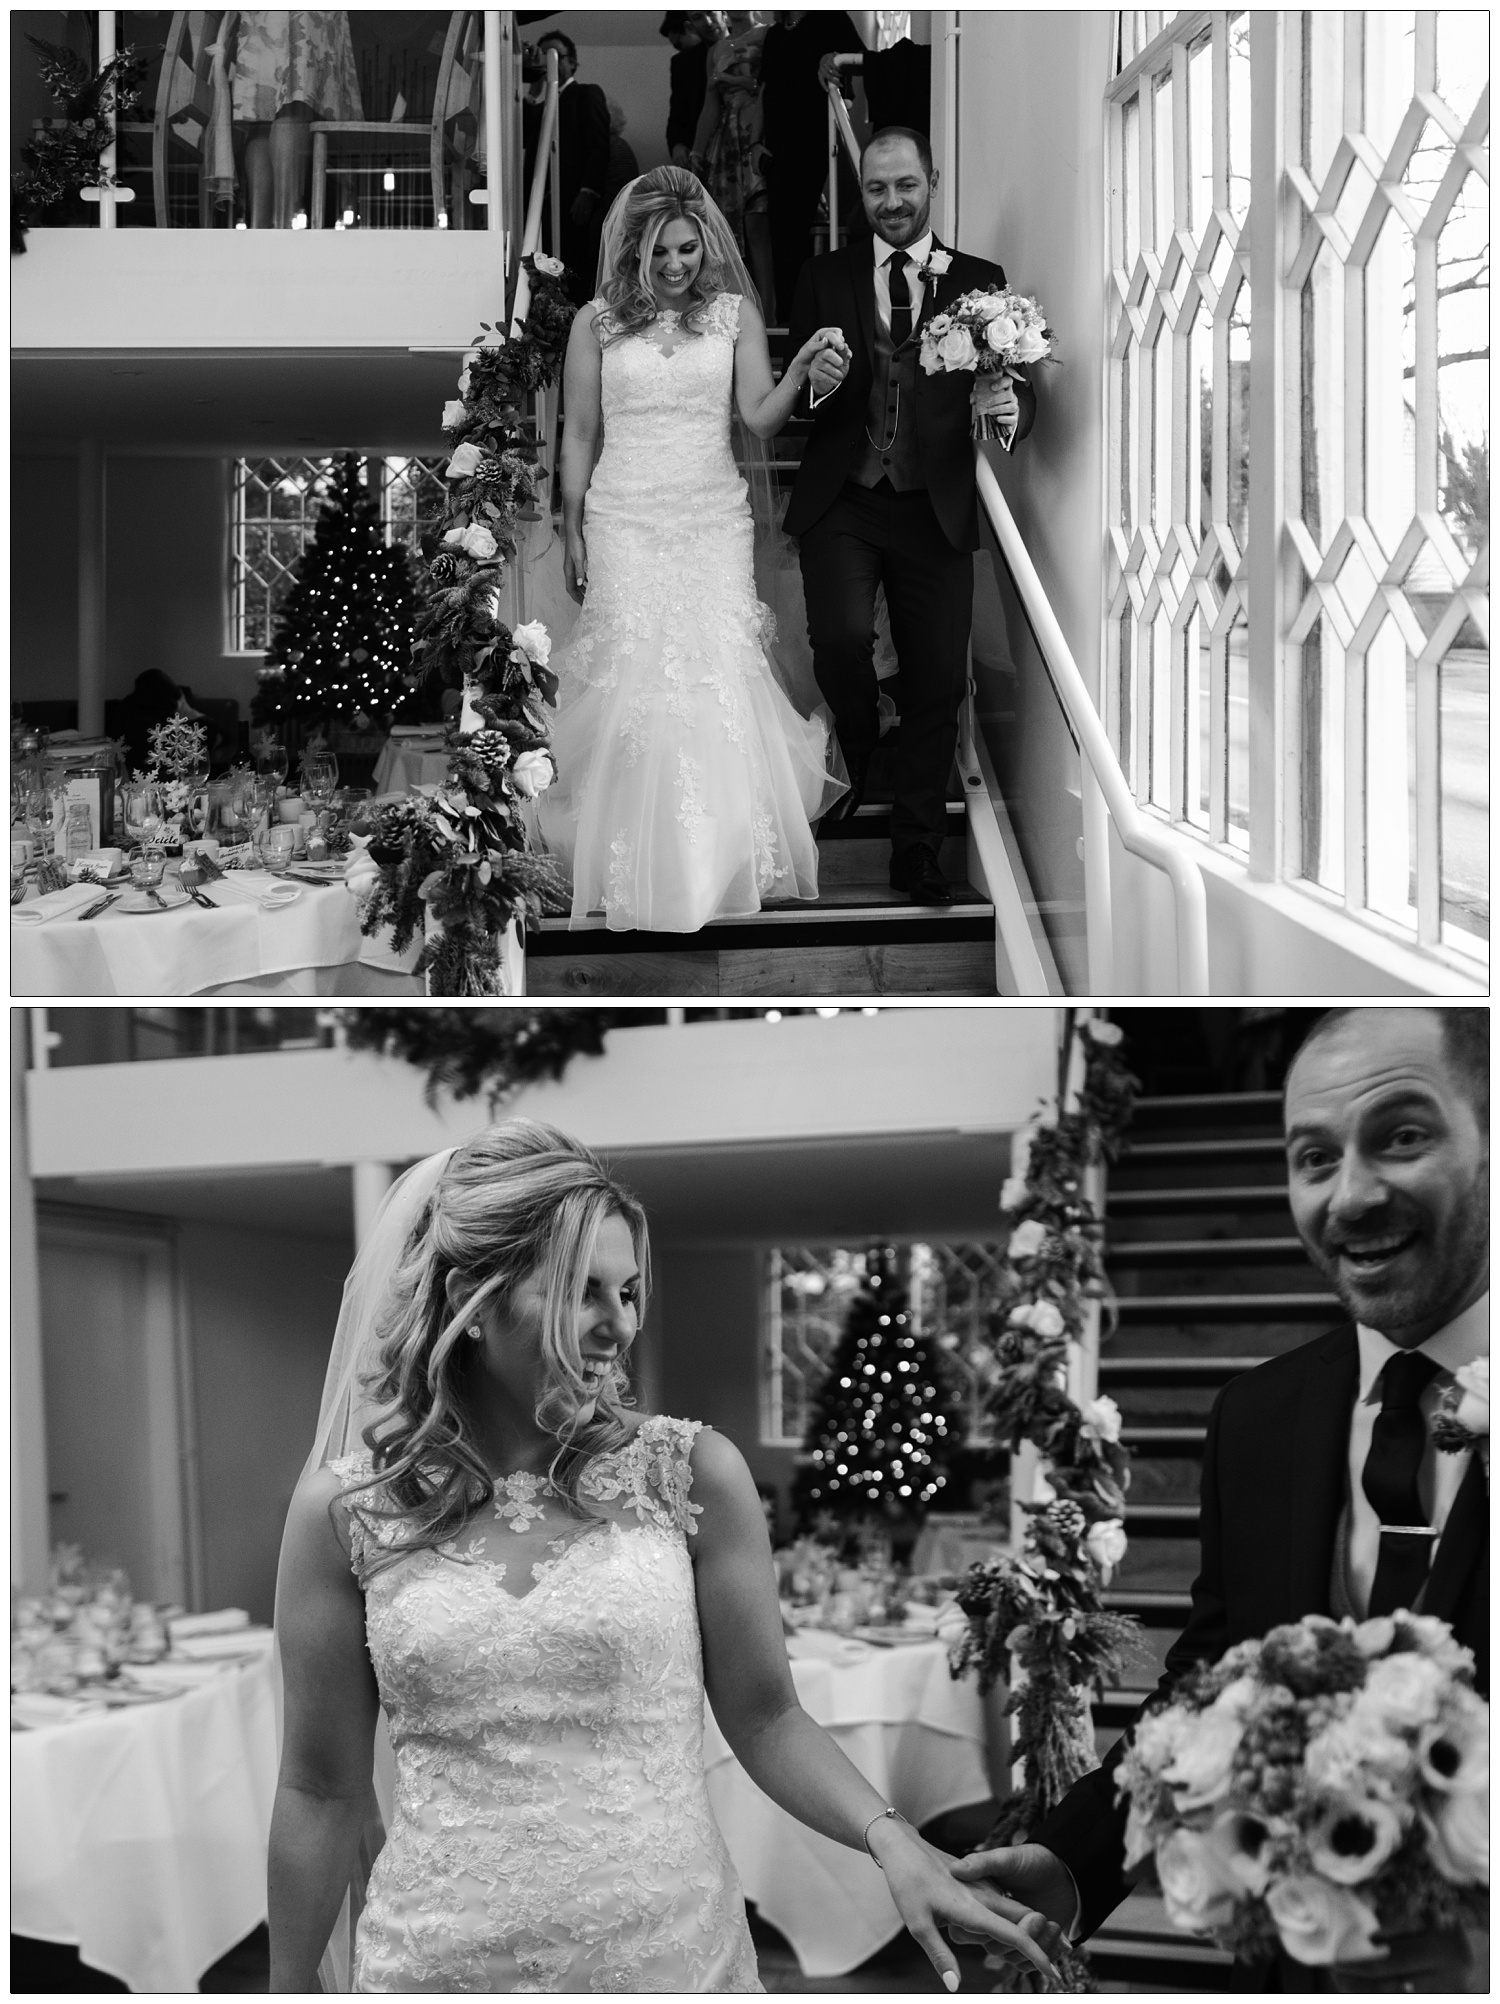 Bride and groom walk down the stairs after wedding ceremony at the Old Parish Rooms.